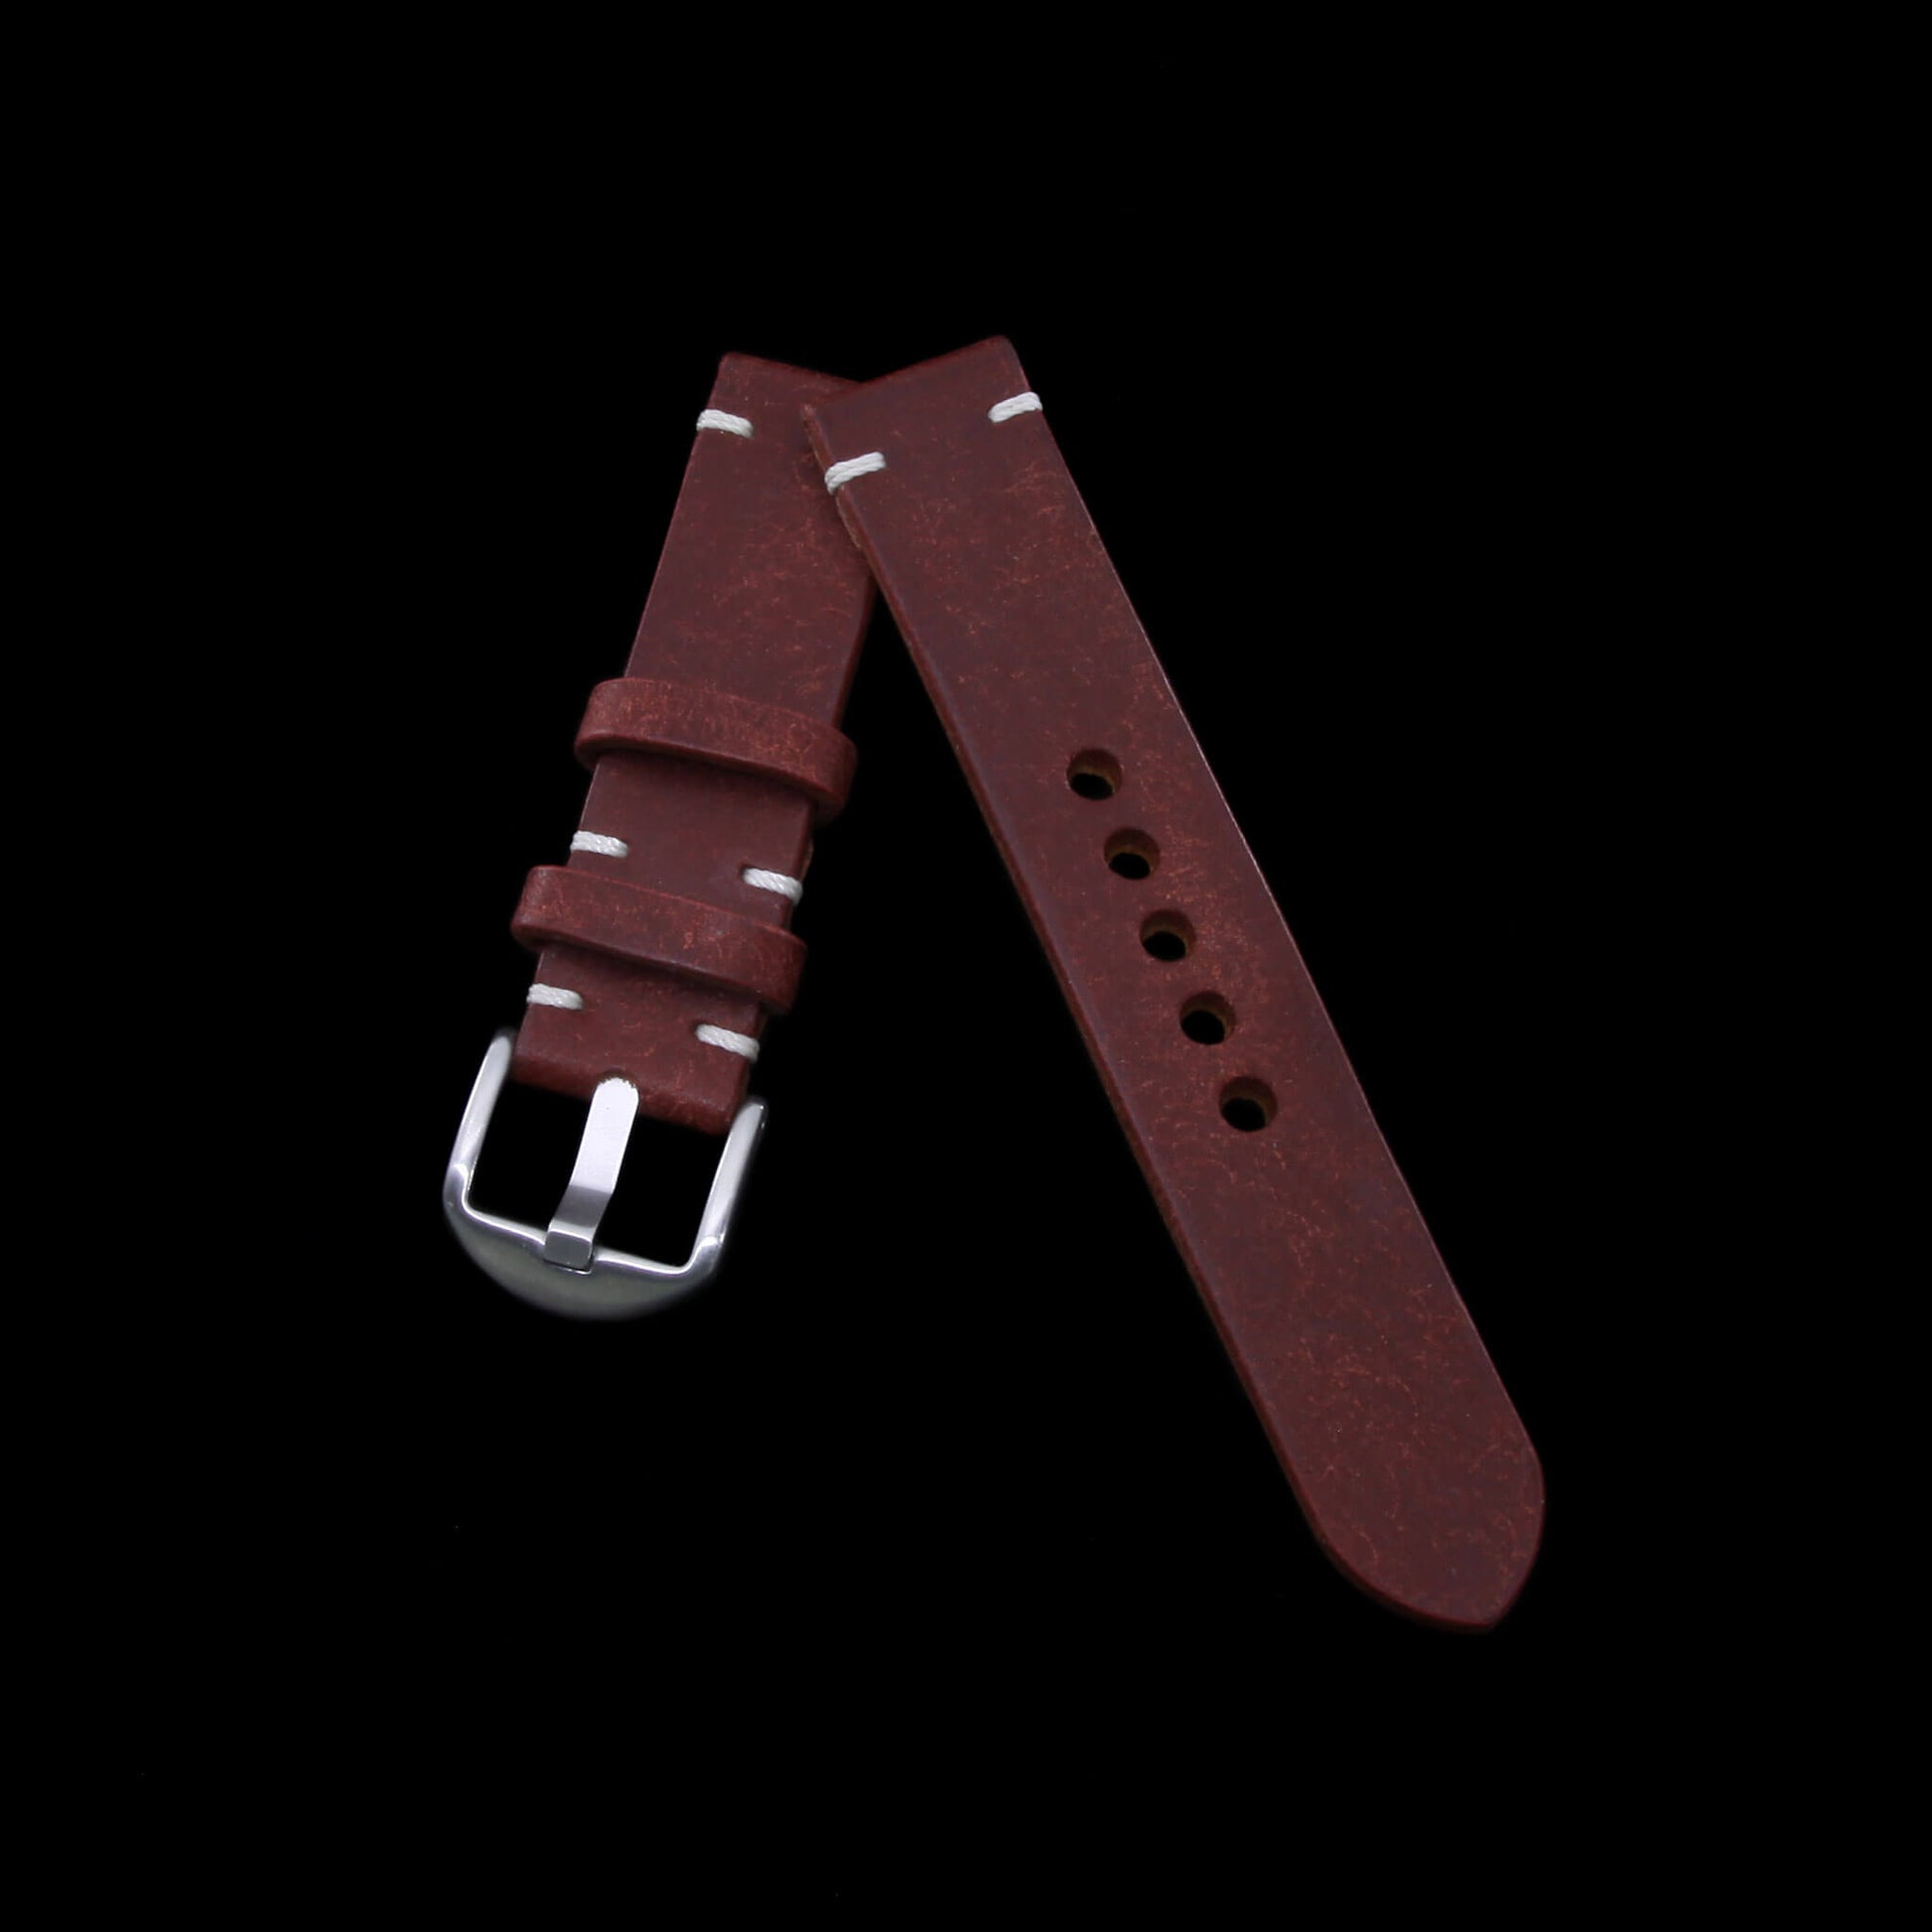 2-Piece Minimalist Leather Watch Strap, made with Pueblo Cocinella Italian veg-tanned leather by Cozy Handmade